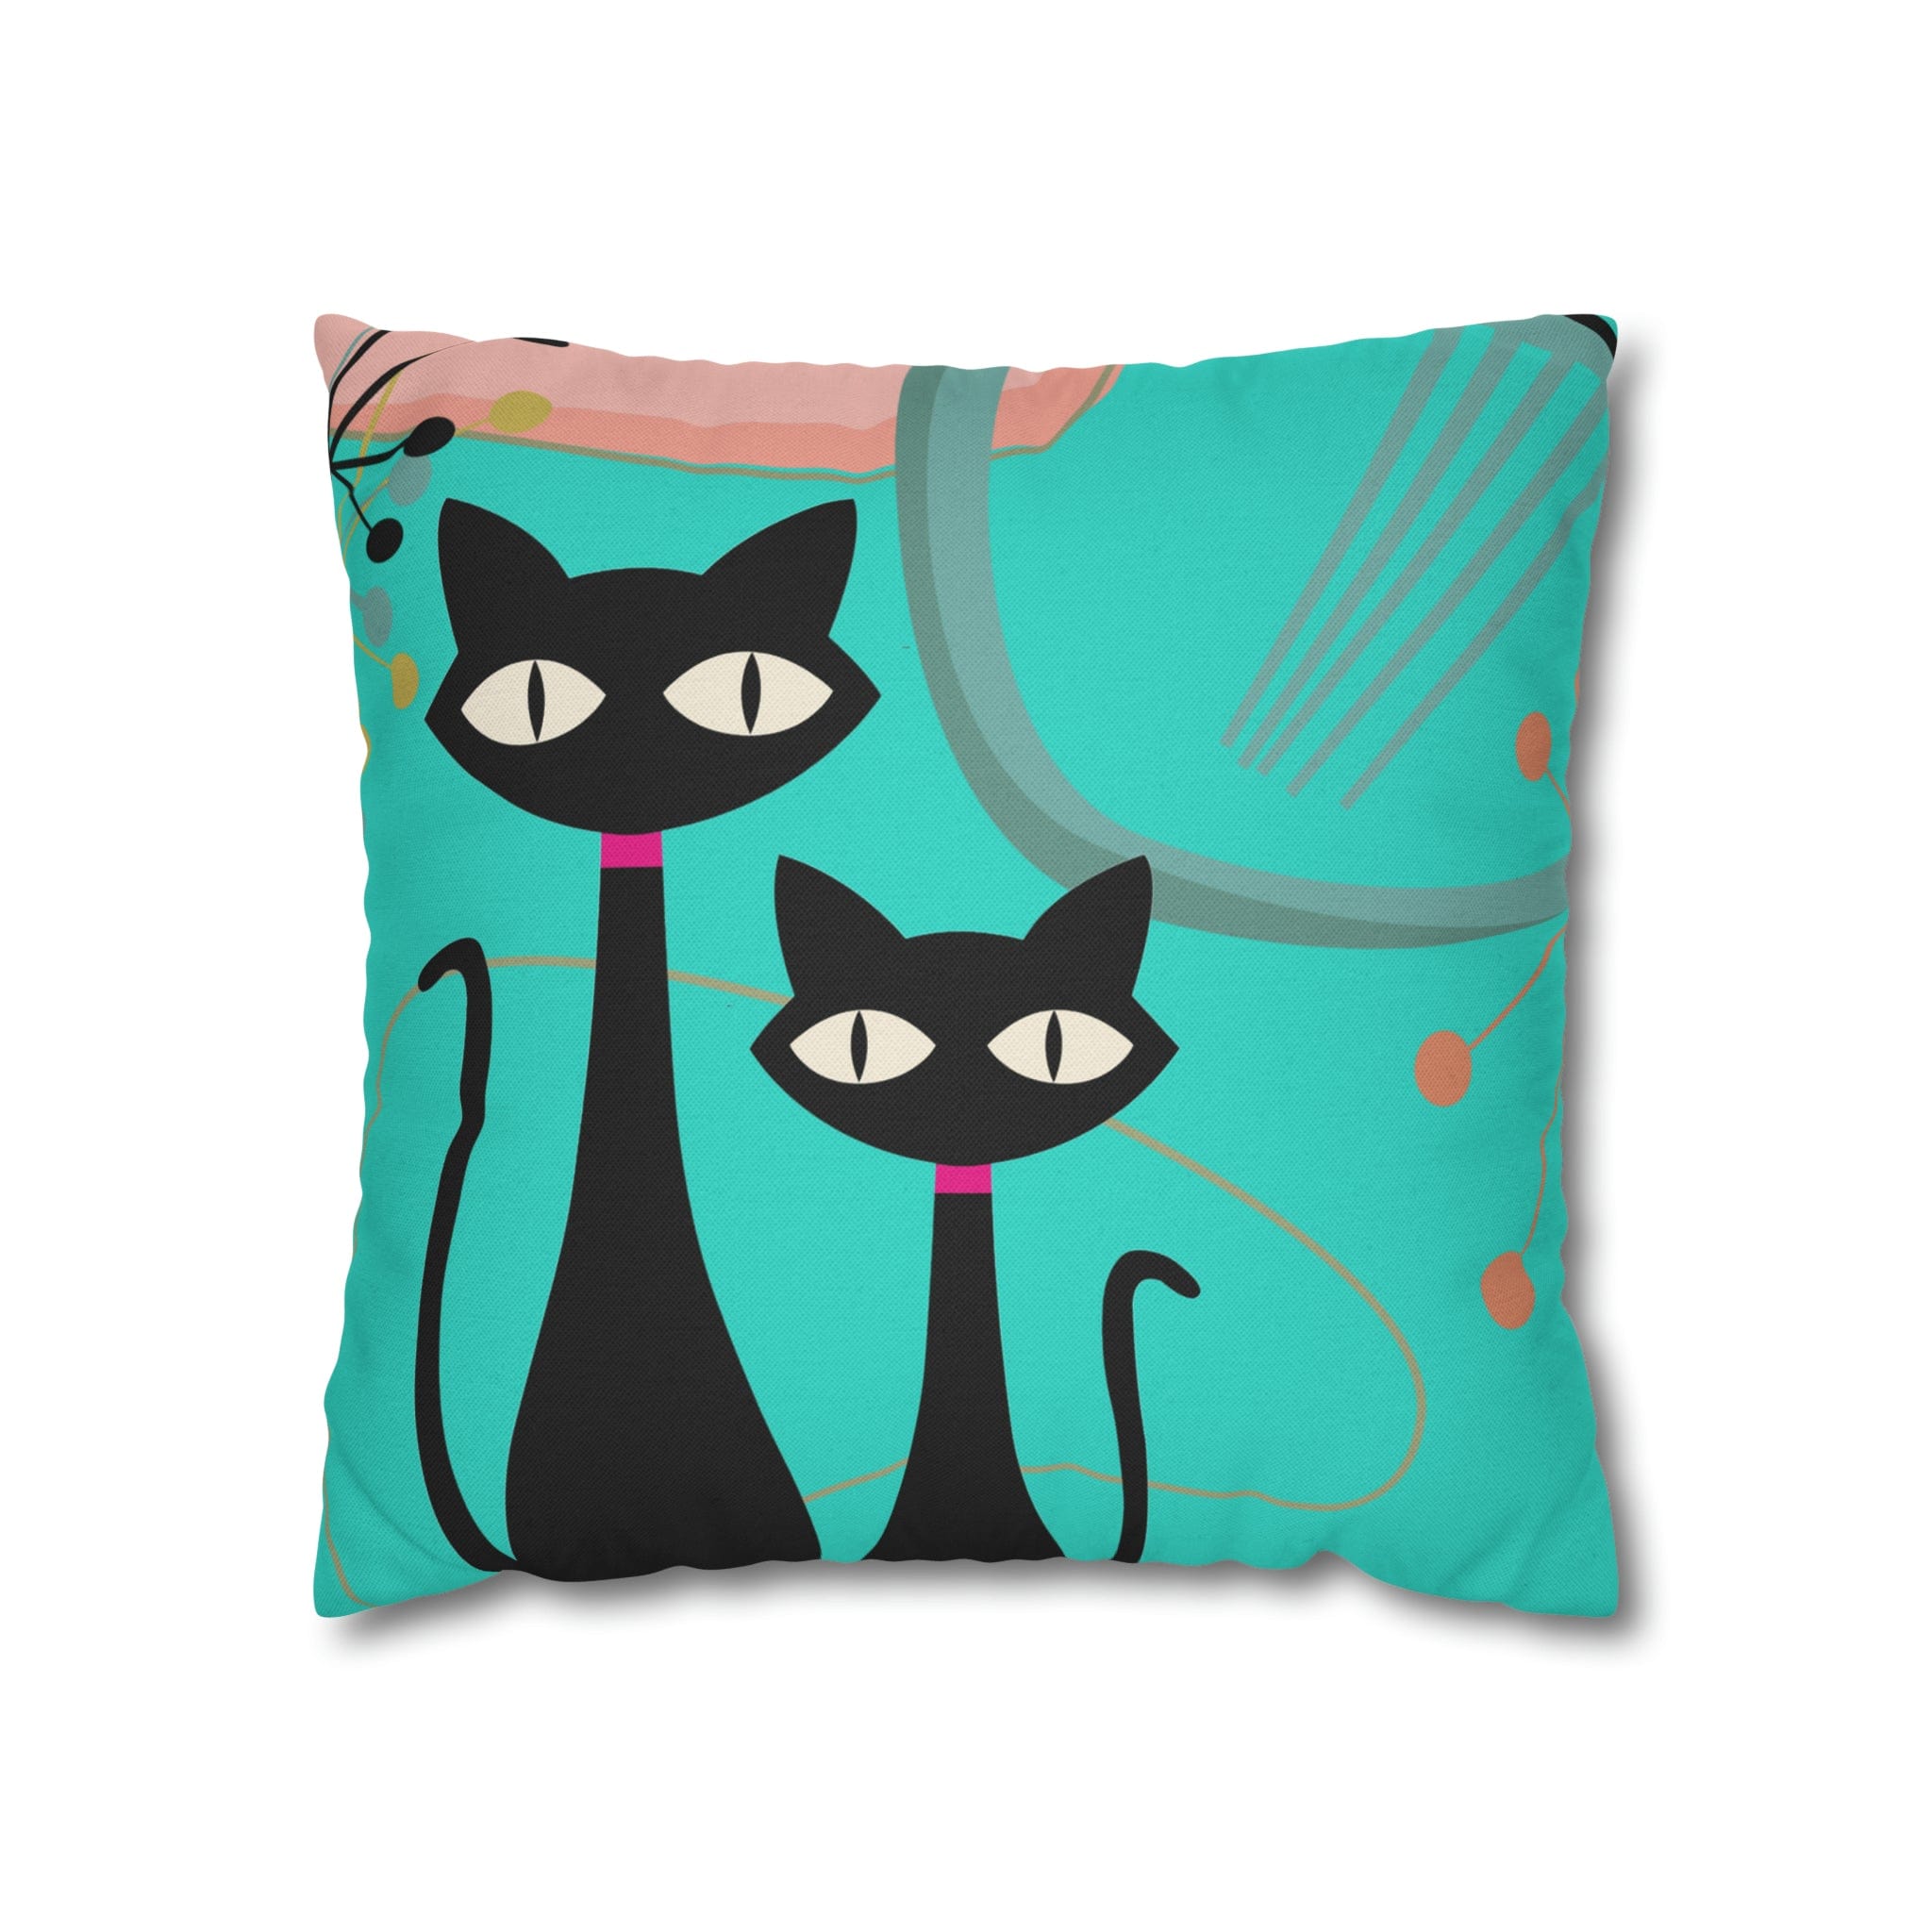 Kate McEnroe New York Retro Atomic Cat Throw Pillow Cover in Mid Century Modern Turquoise and Pink Throw Pillow Covers 16&quot; × 16&quot; 14207306180970179287